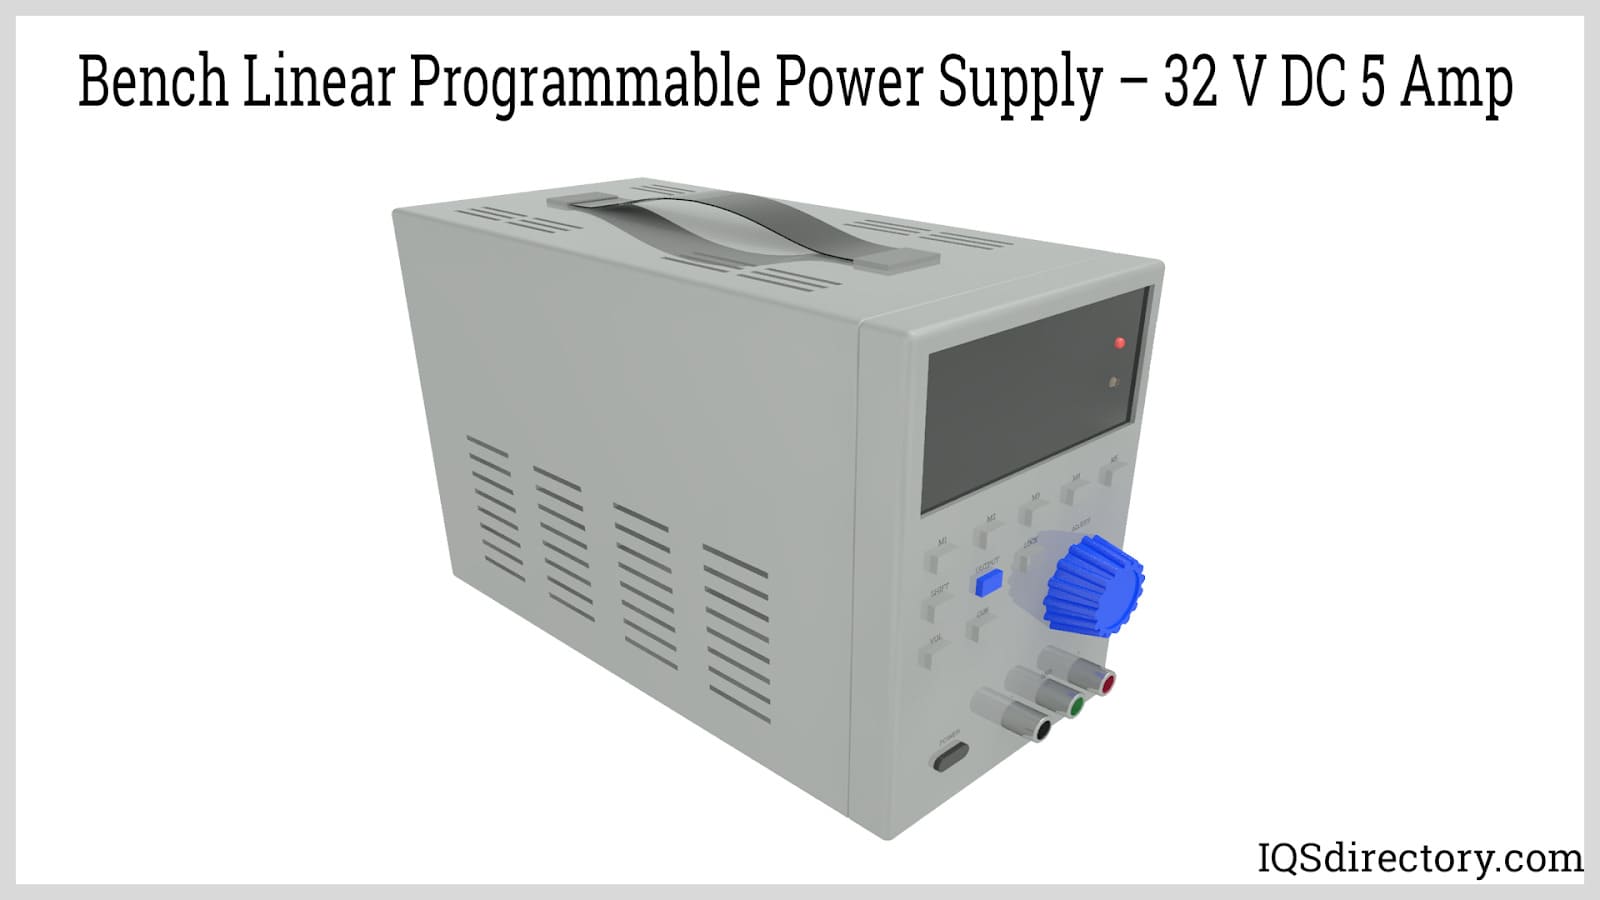 Bench Linear Programmable Power Supply - 32 V DC 5 Amp